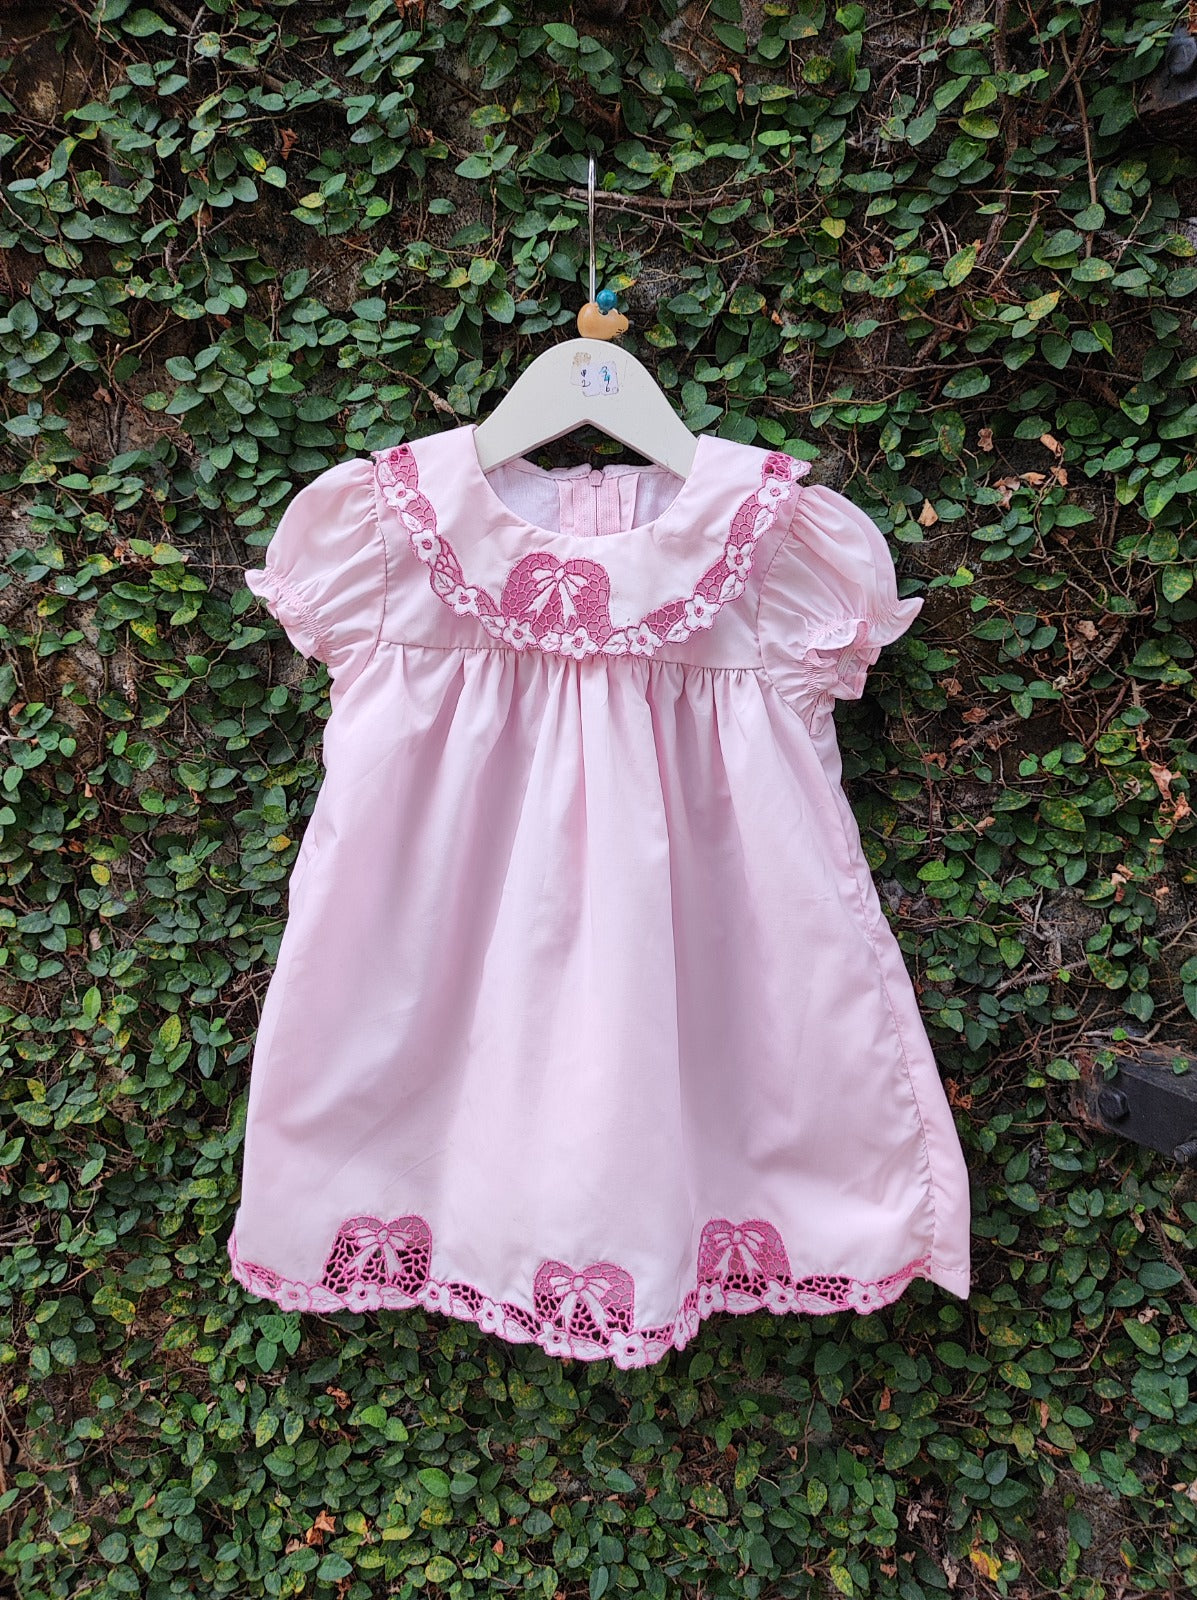 PatPat Baby Dress Baby Girl Clothes New Born Infant Party Dresses Pink  Ribbed Bowknot Floral Mesh for NewBorn Kids Birthday - AliExpress